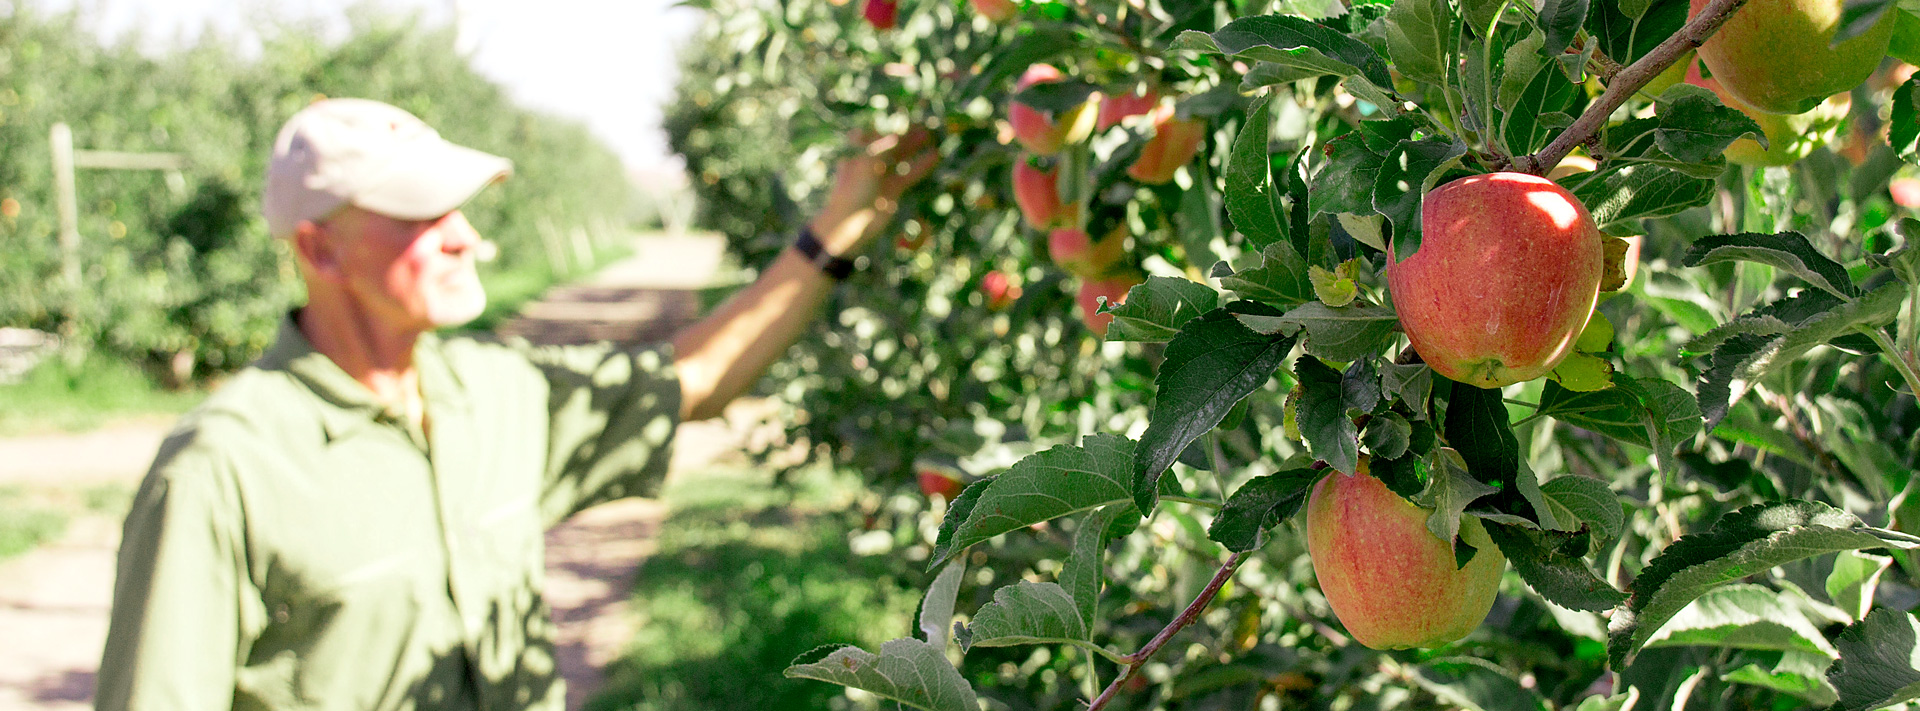 Apples on a Tree in an Orchard with a Man Picking Apples Blurred in the Background